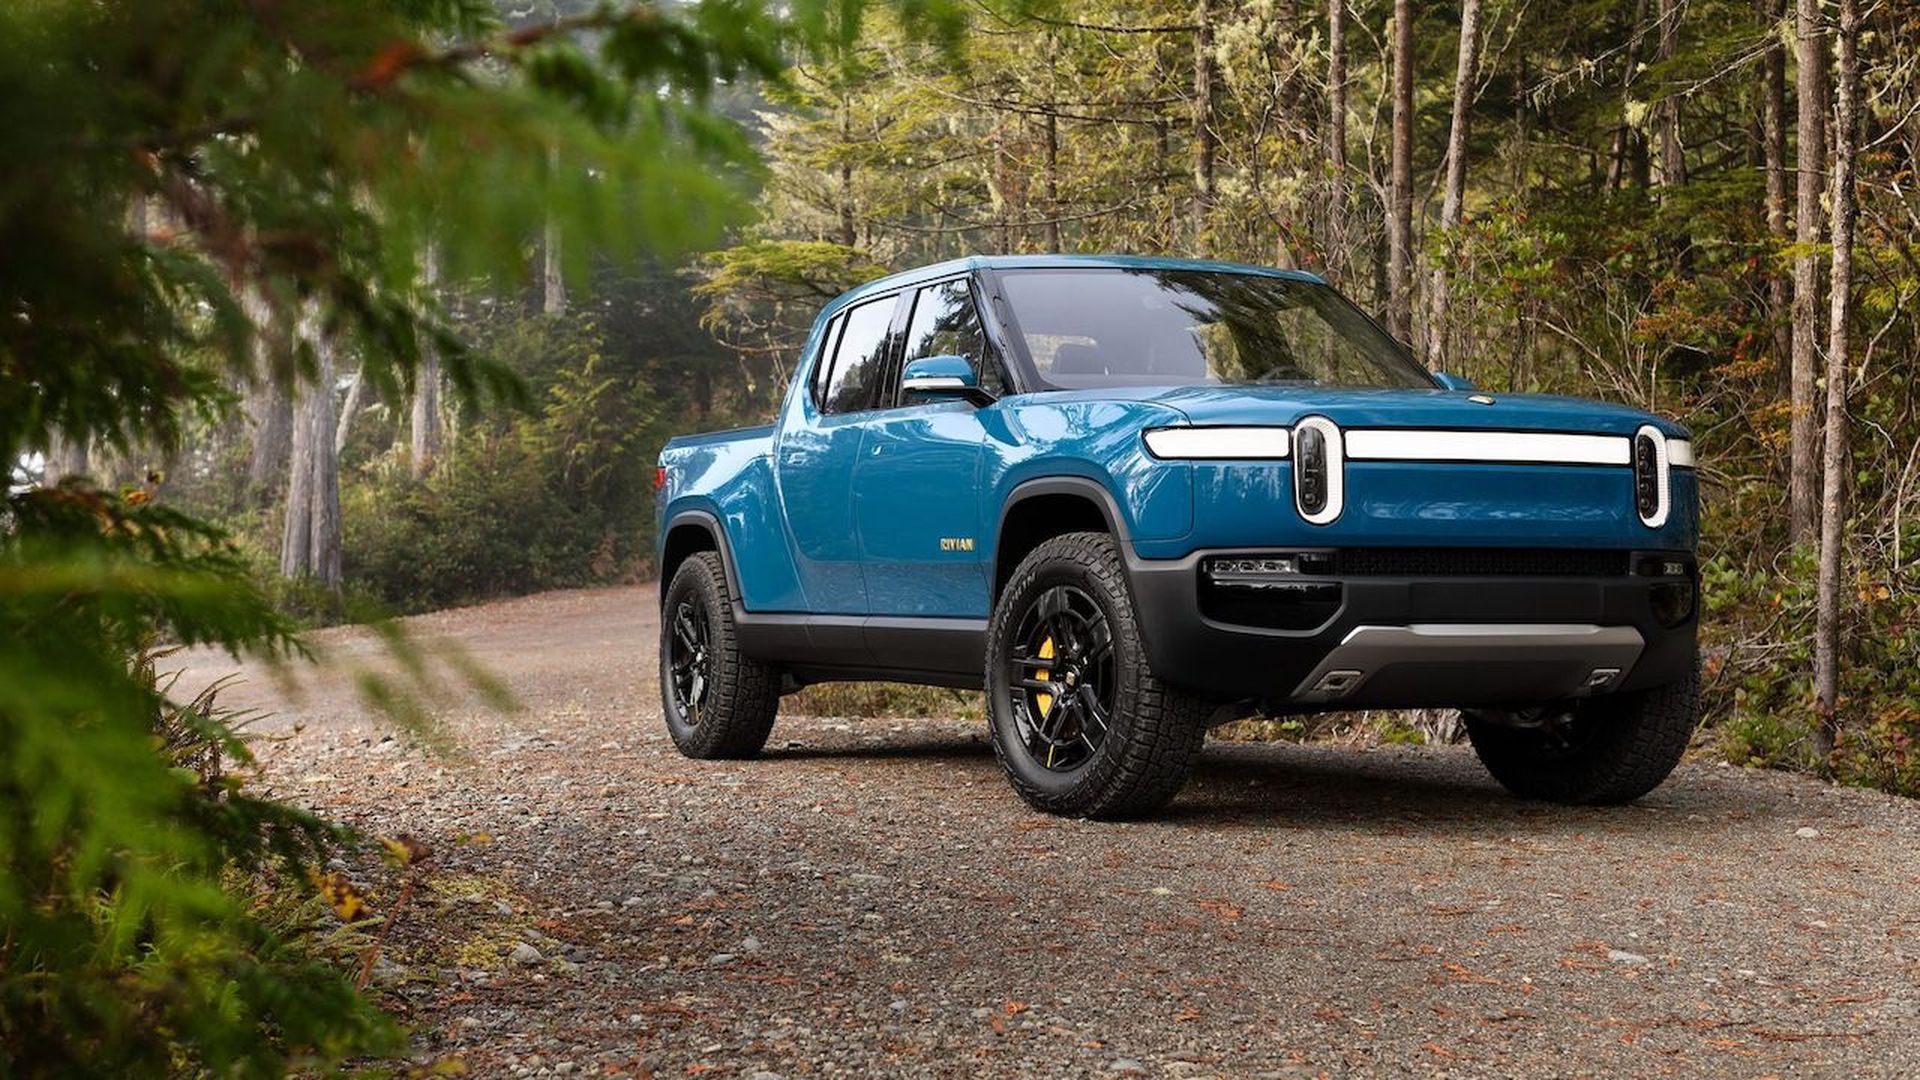 Photo of the Rivian R1T pickup truck